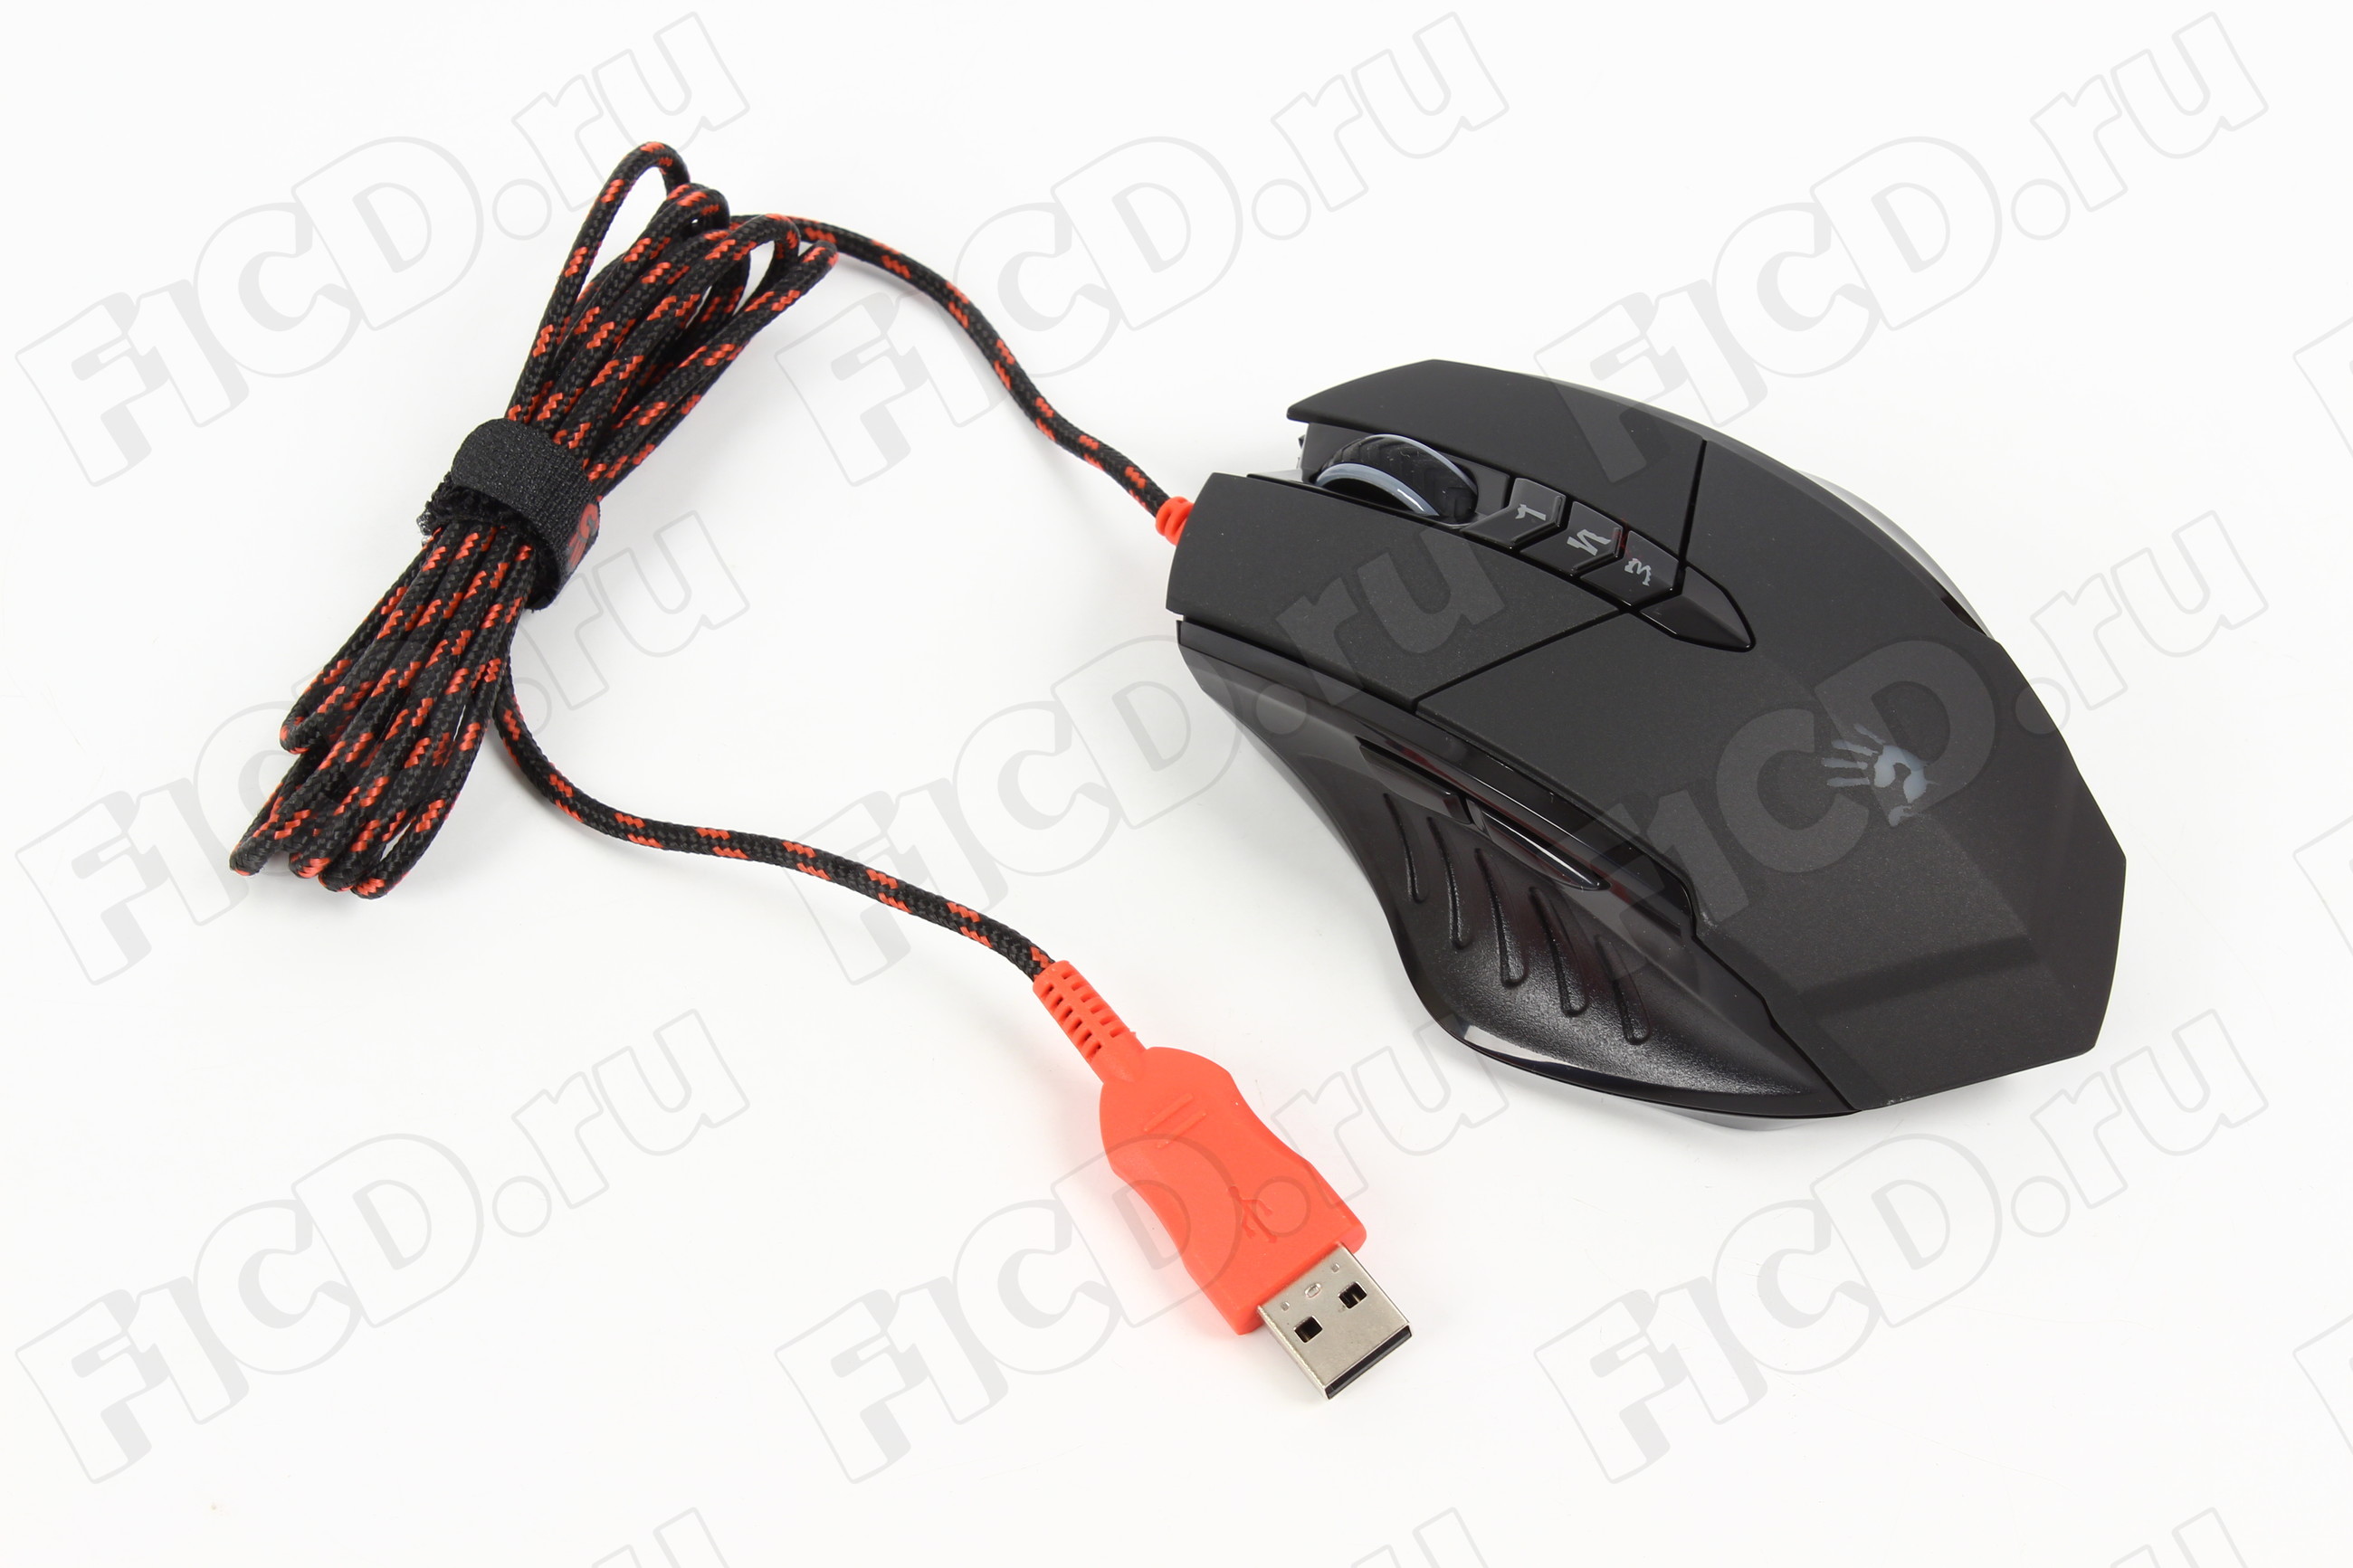 Blacklisted device bloody mouse a4tech rust фото 71